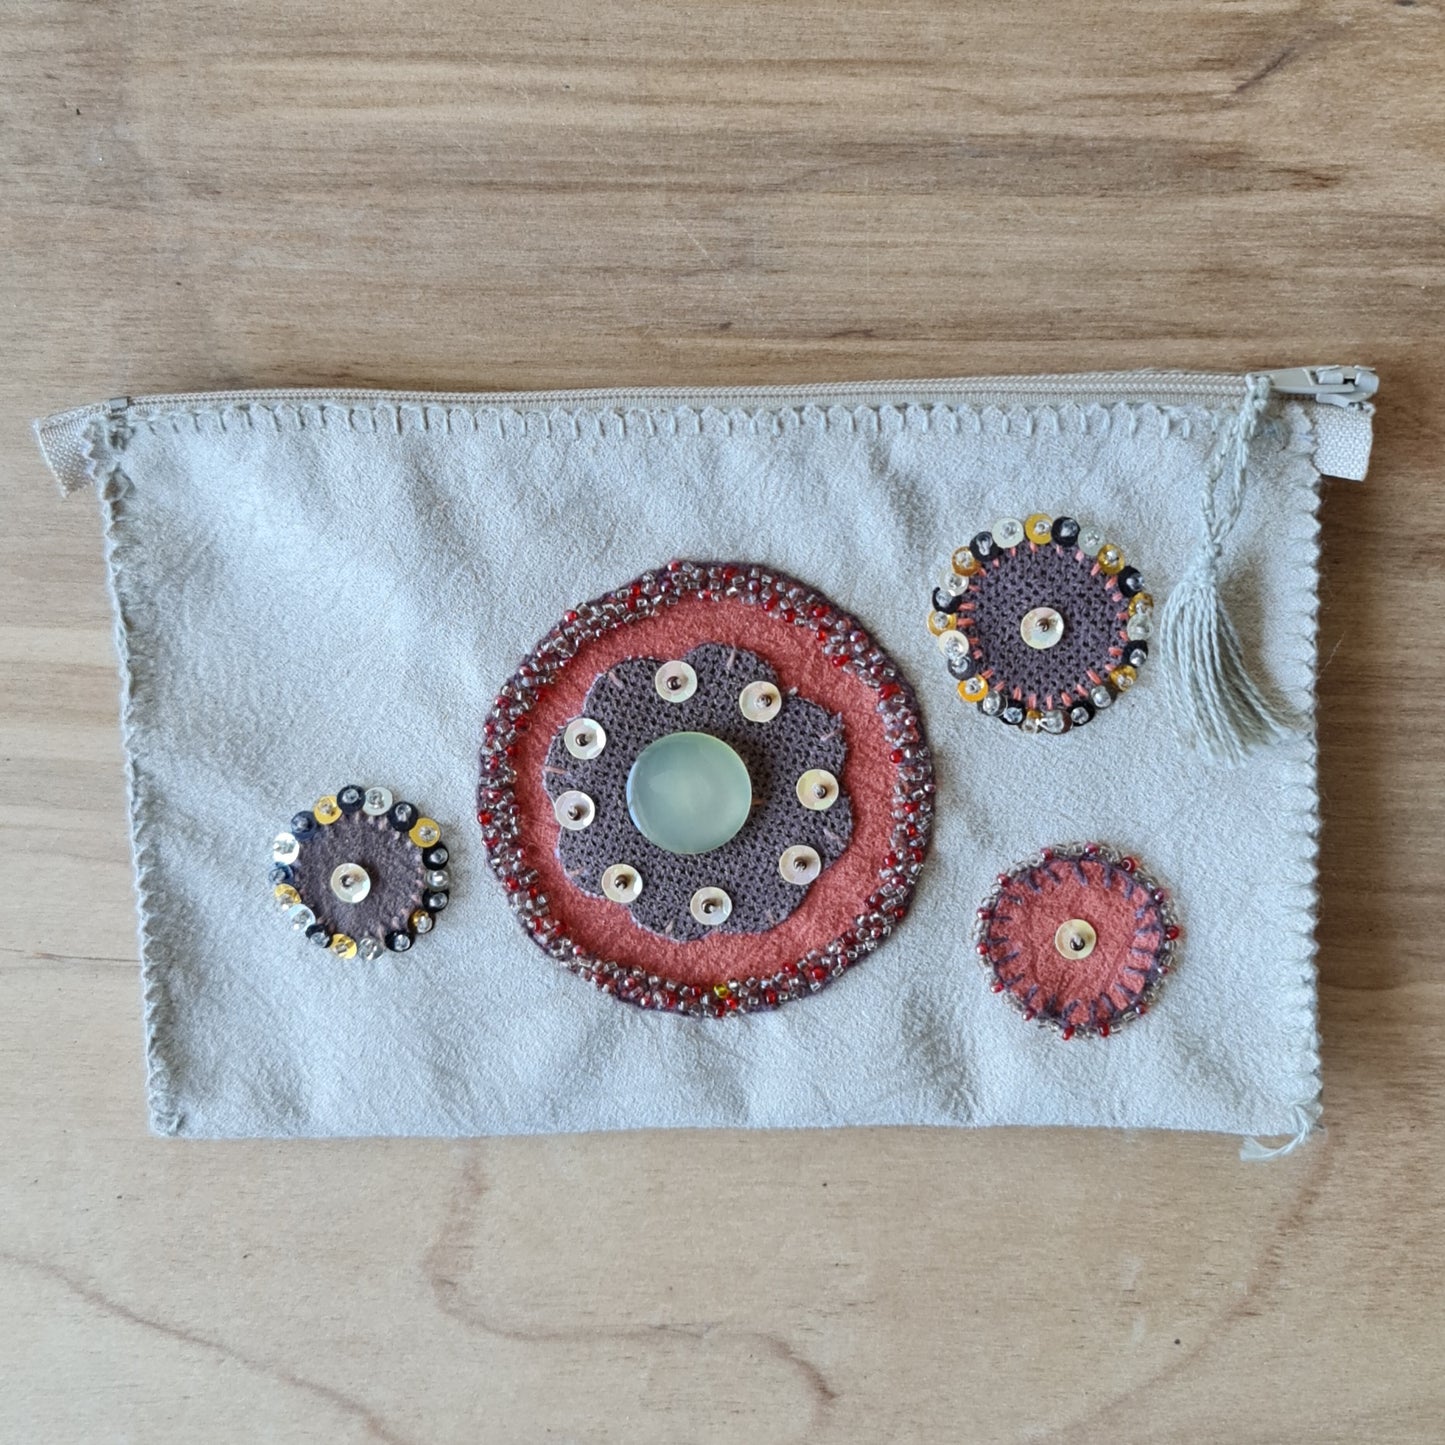 Stitched cosmetic case made of light brown suede type fabric with pearl and fabric embroidered circular decorations on top / linen lining / zipper closure 19 x 12 cm (AMA)